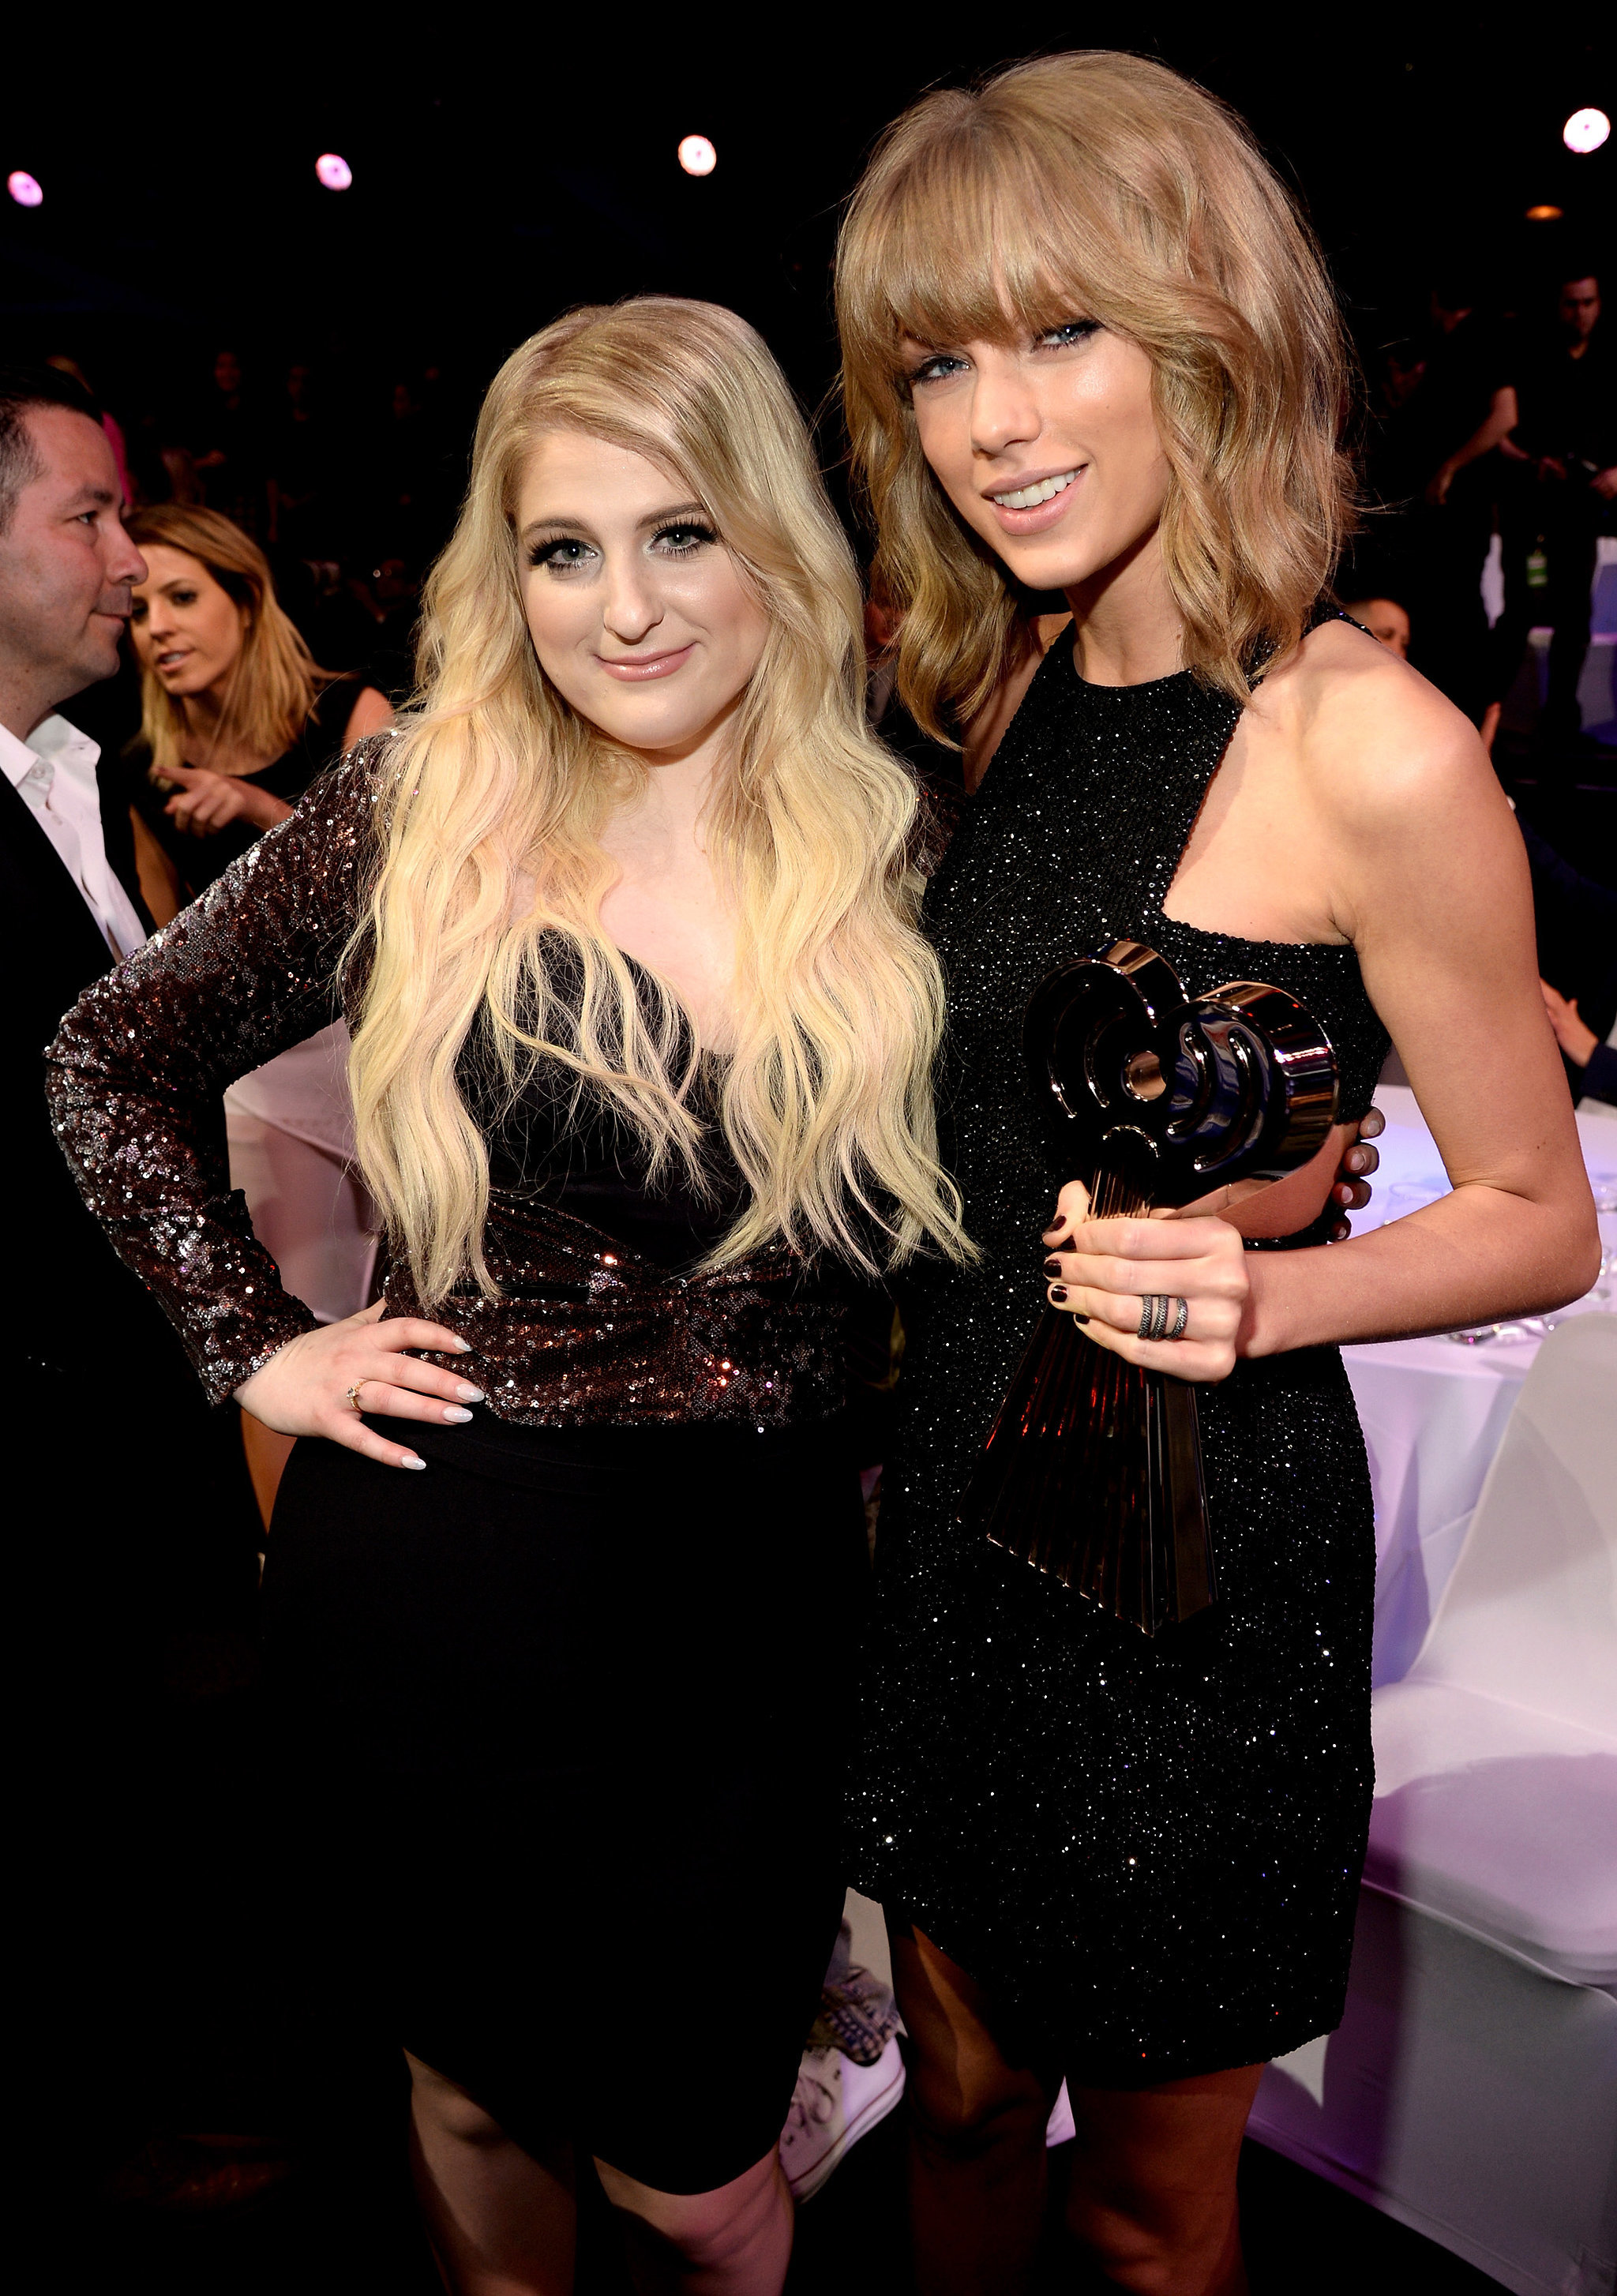 Meghan Trainor And Taylor Swift Go Inside The Iheartradio Music Awards With The Best Snaps Of